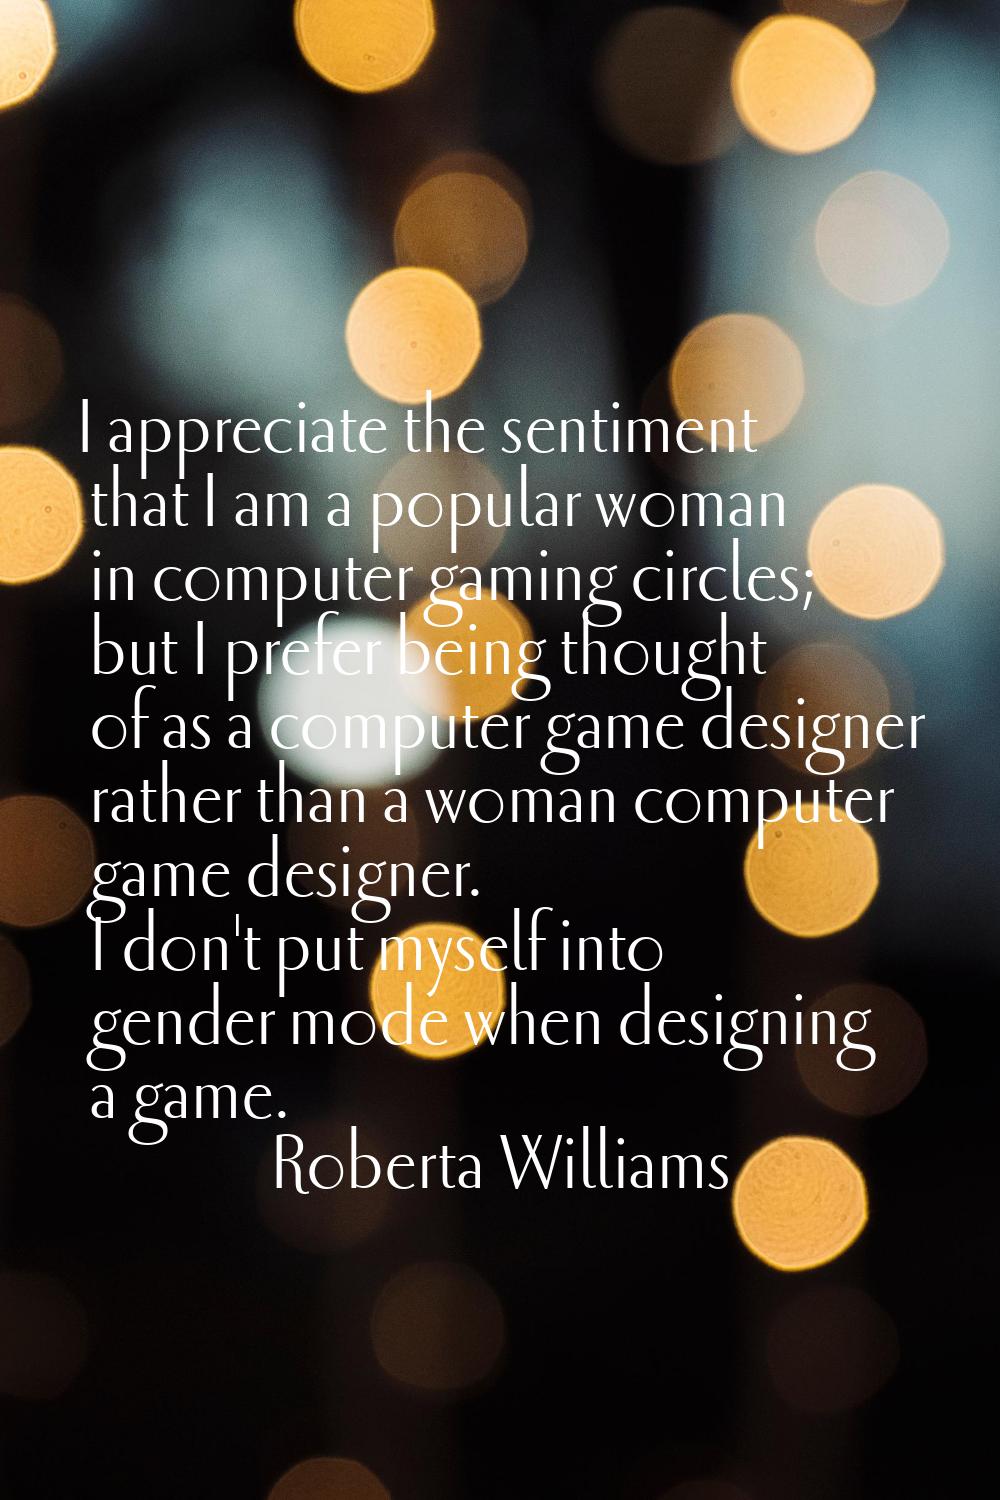 I appreciate the sentiment that I am a popular woman in computer gaming circles; but I prefer being